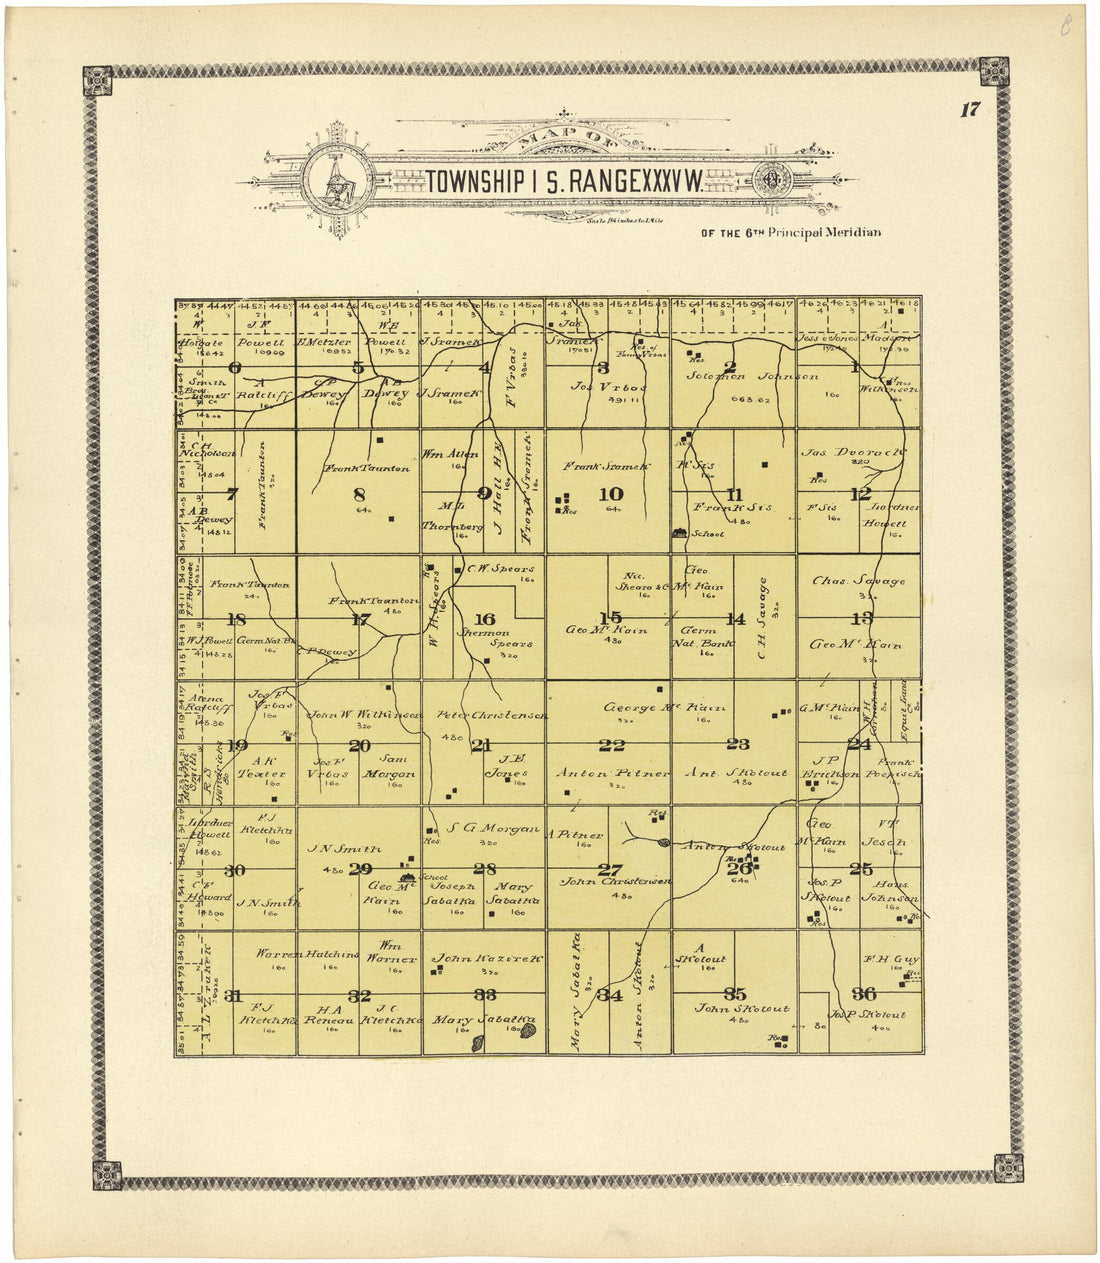 This old map of Map of Township 1 S. Range XXXV W. from Standard Atlas of Rawlins County, Kansas from 1906 was created by  Geo. A. Ogle &amp; Co in 1906